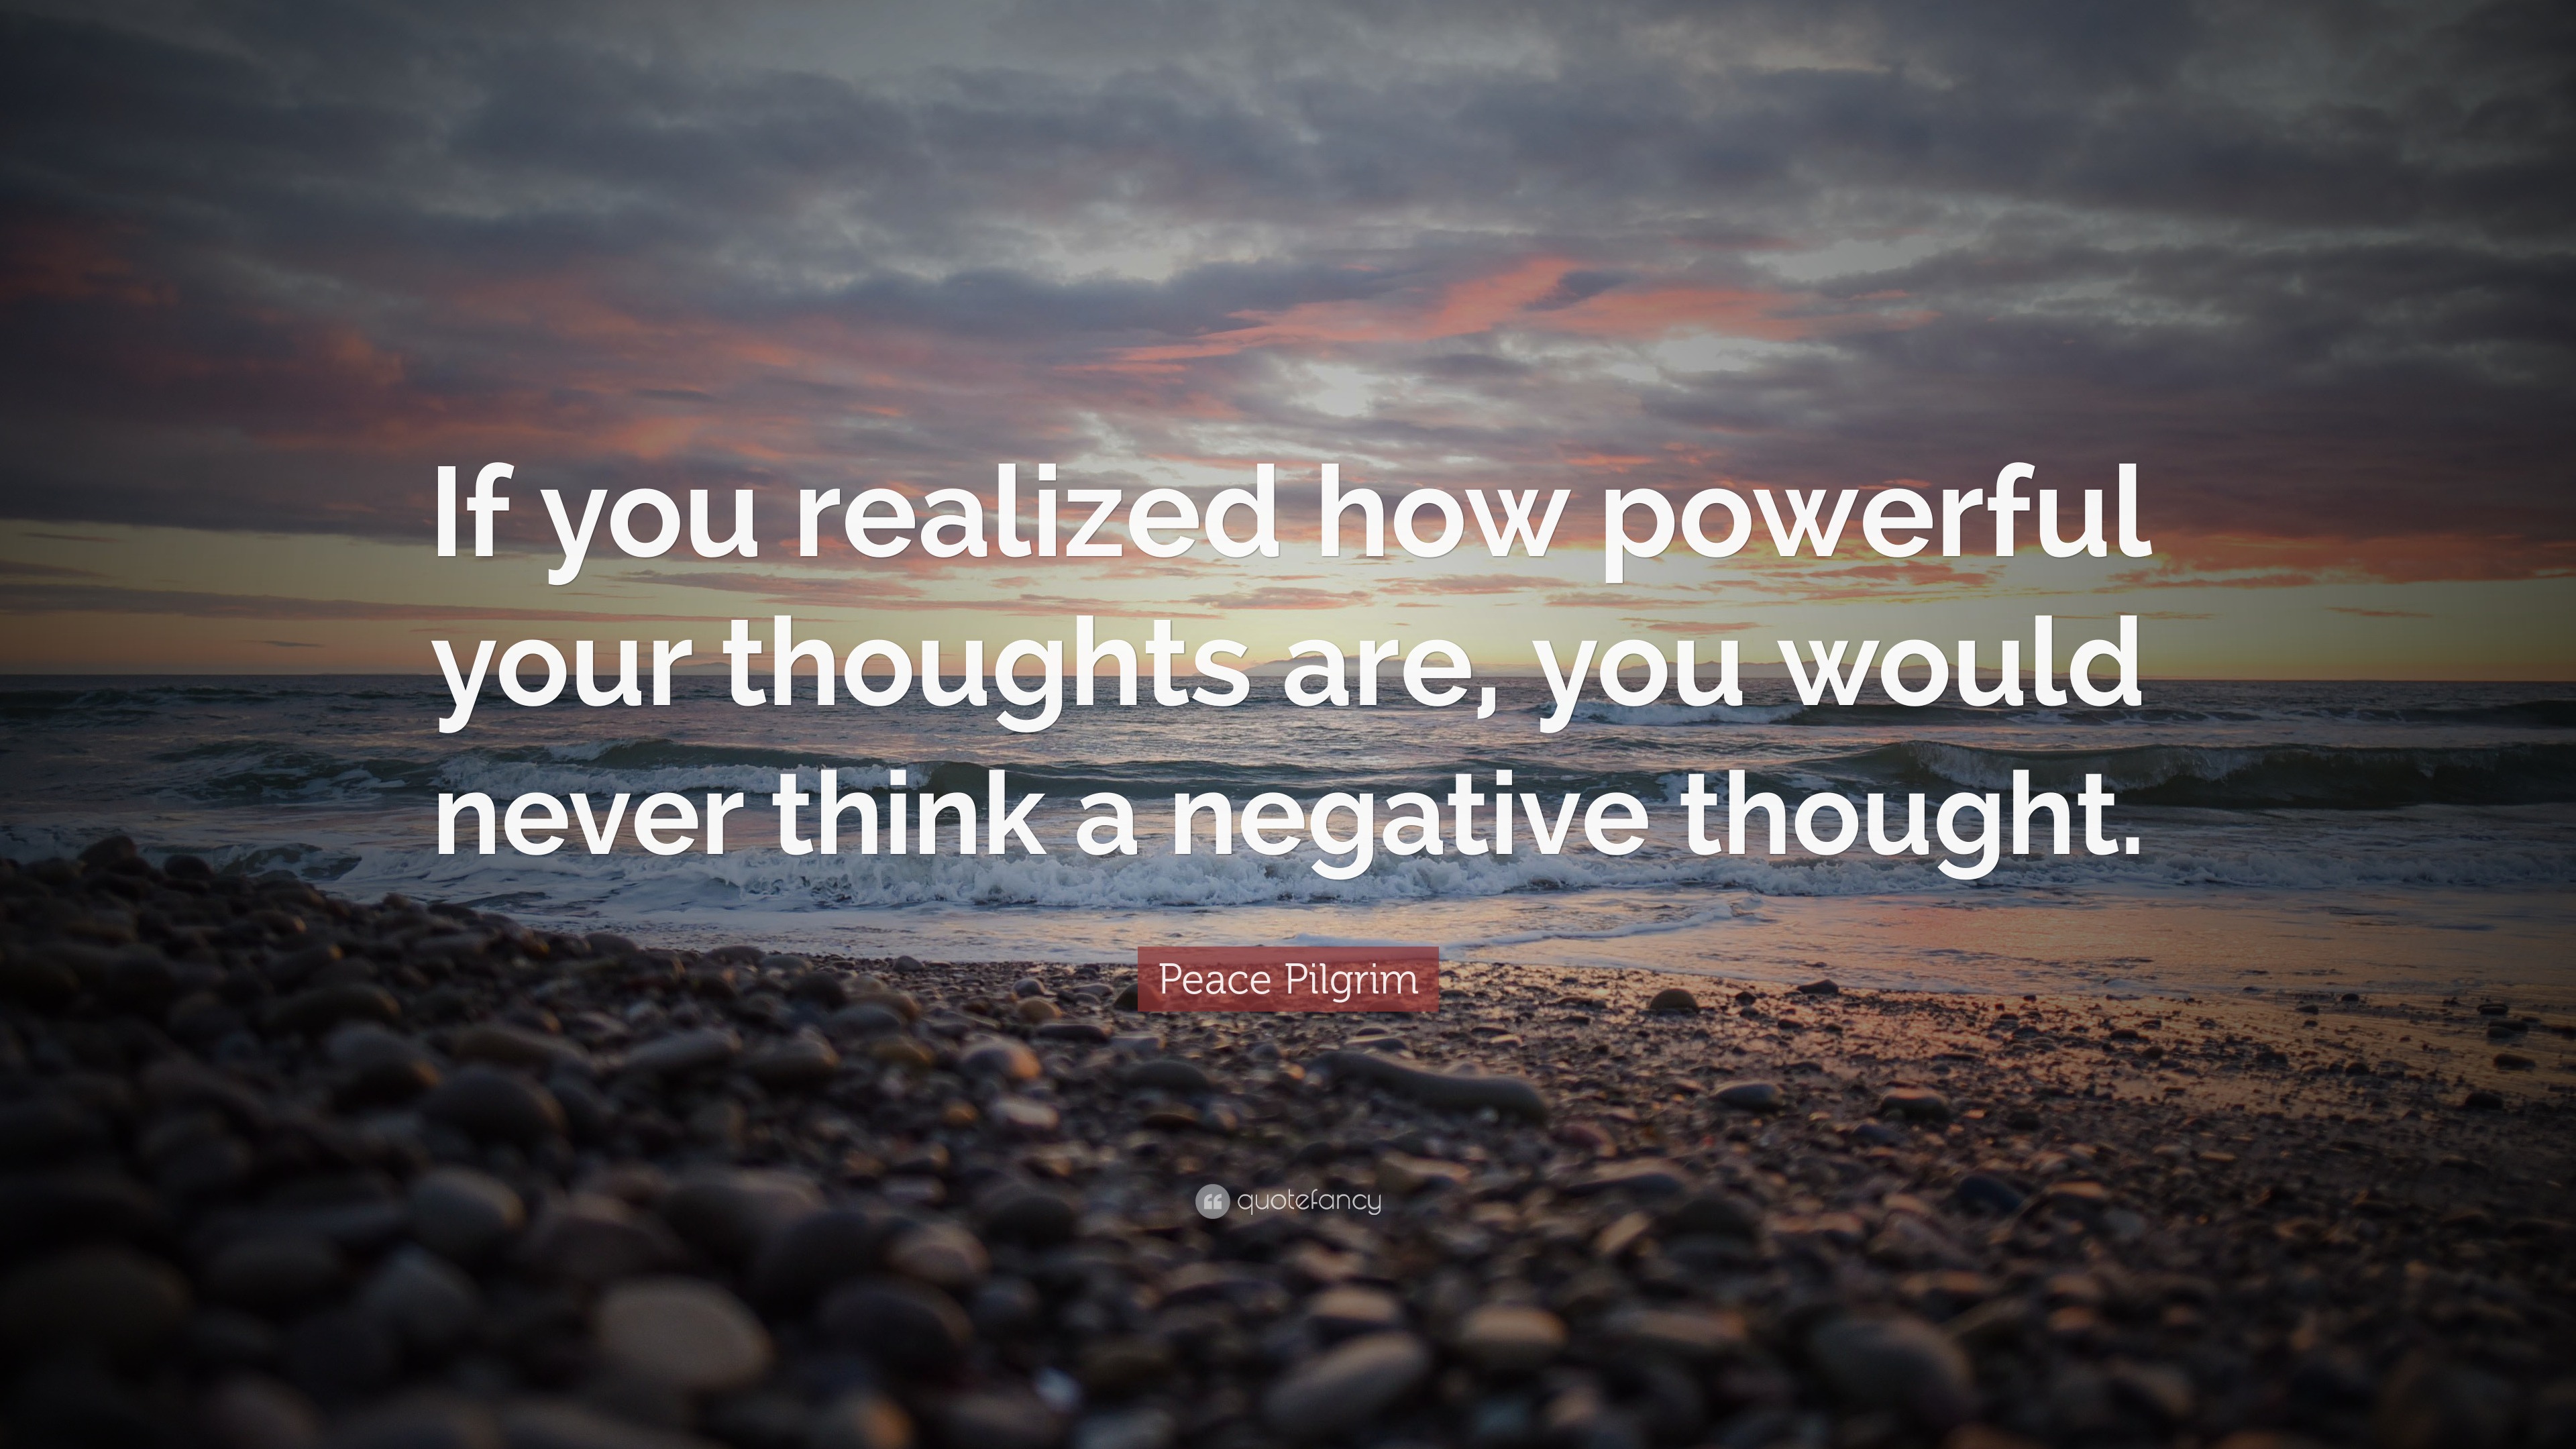 Peace Pilgrim Quote: “If you realized how powerful your thoughts are